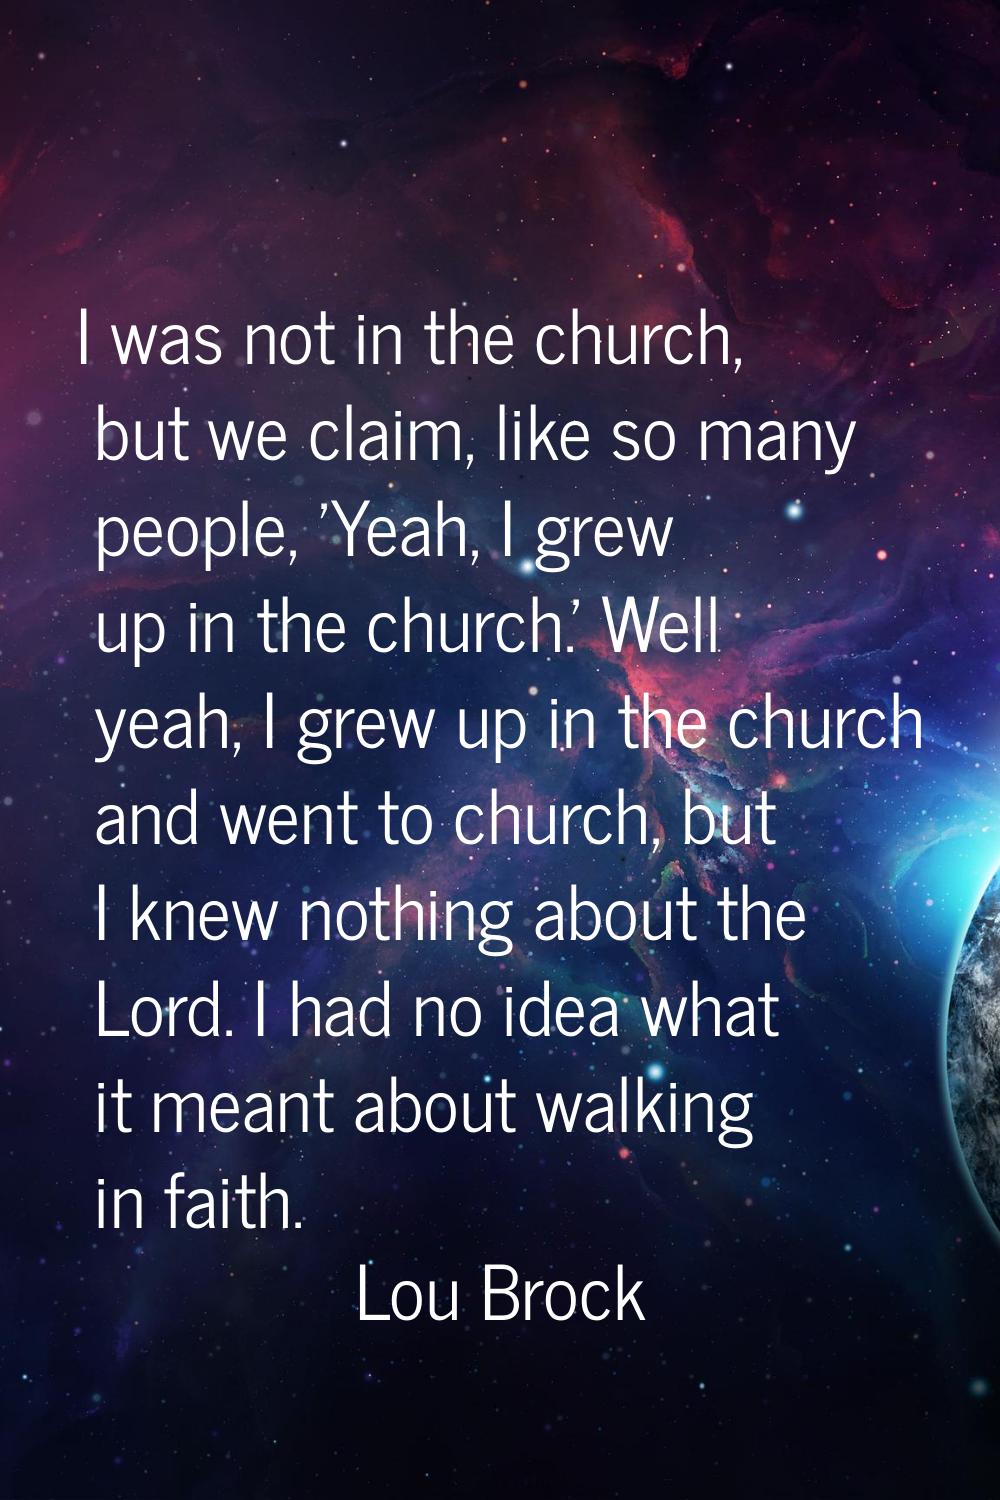 I was not in the church, but we claim, like so many people, 'Yeah, I grew up in the church.' Well y